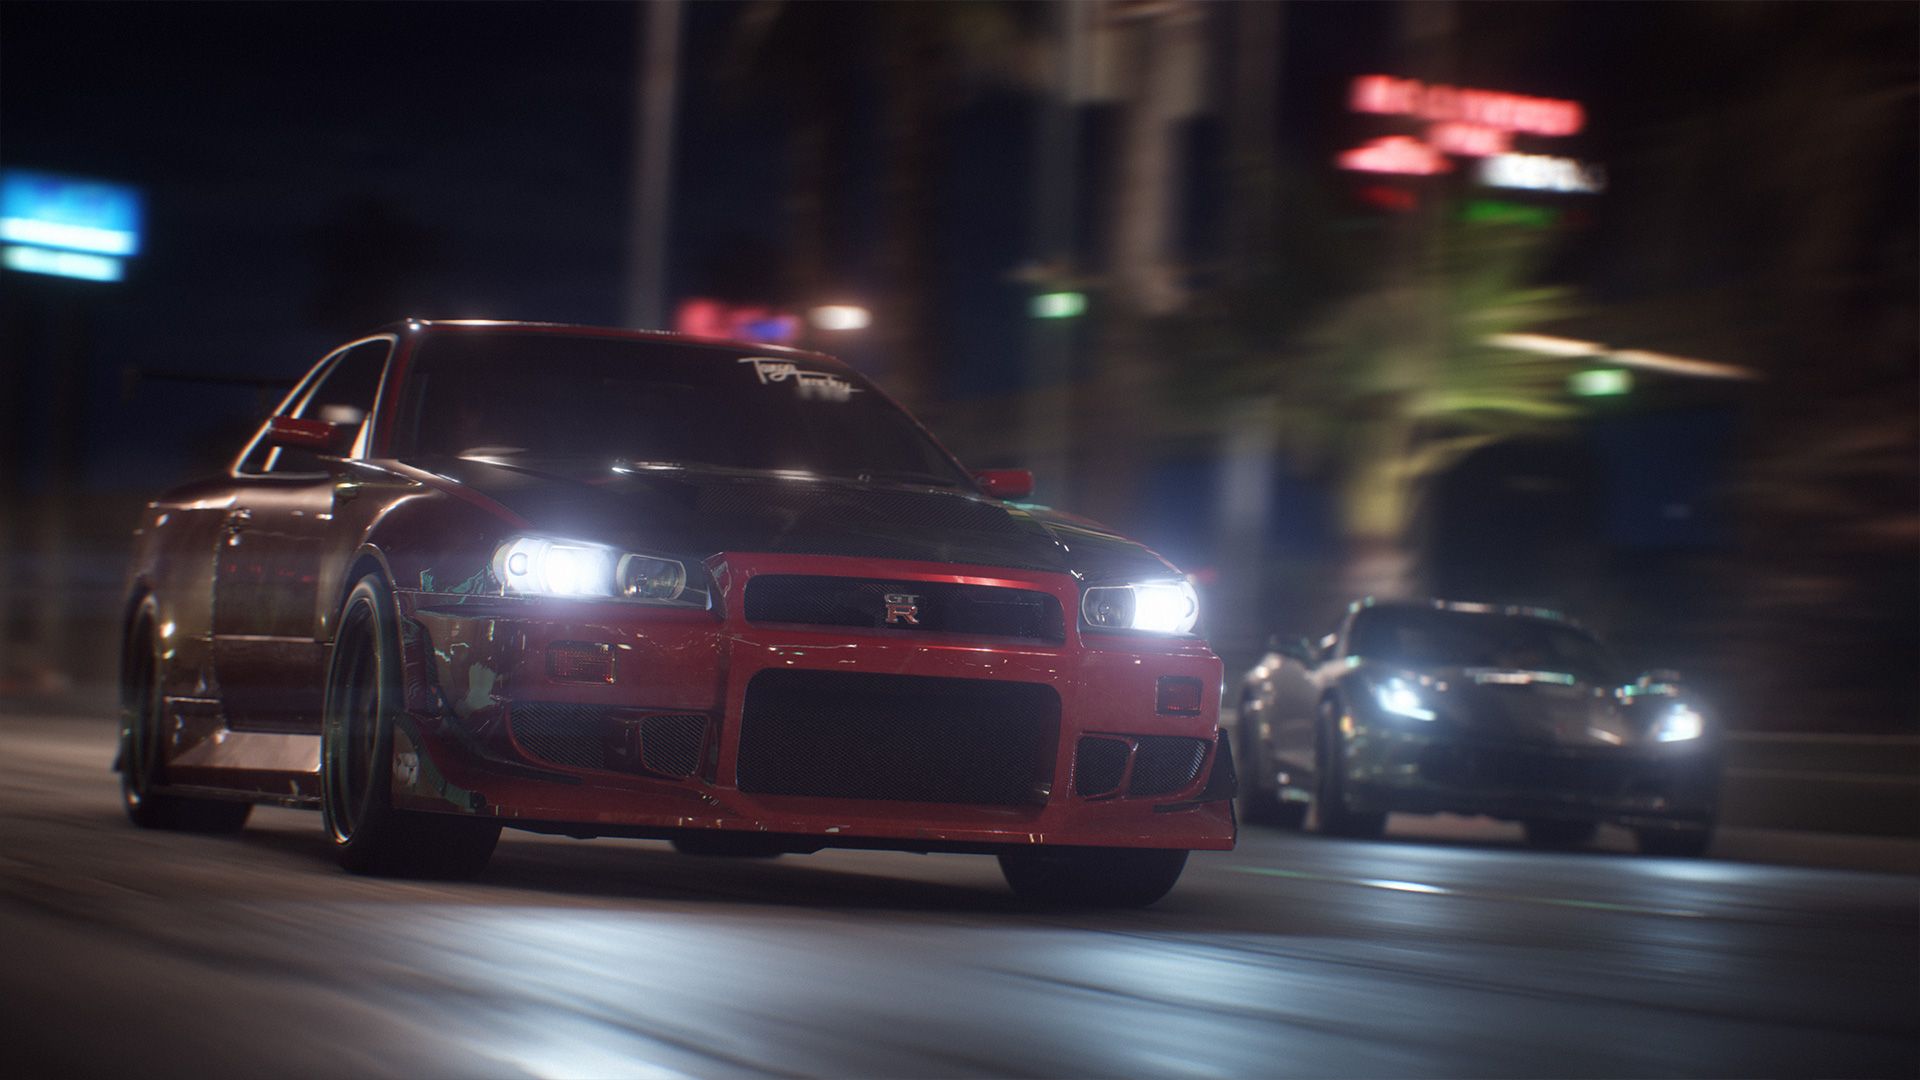 need_for_speed_payback_bring_down_the_house_1080p_clean_r34gtr_screenshot4_1080.jpg